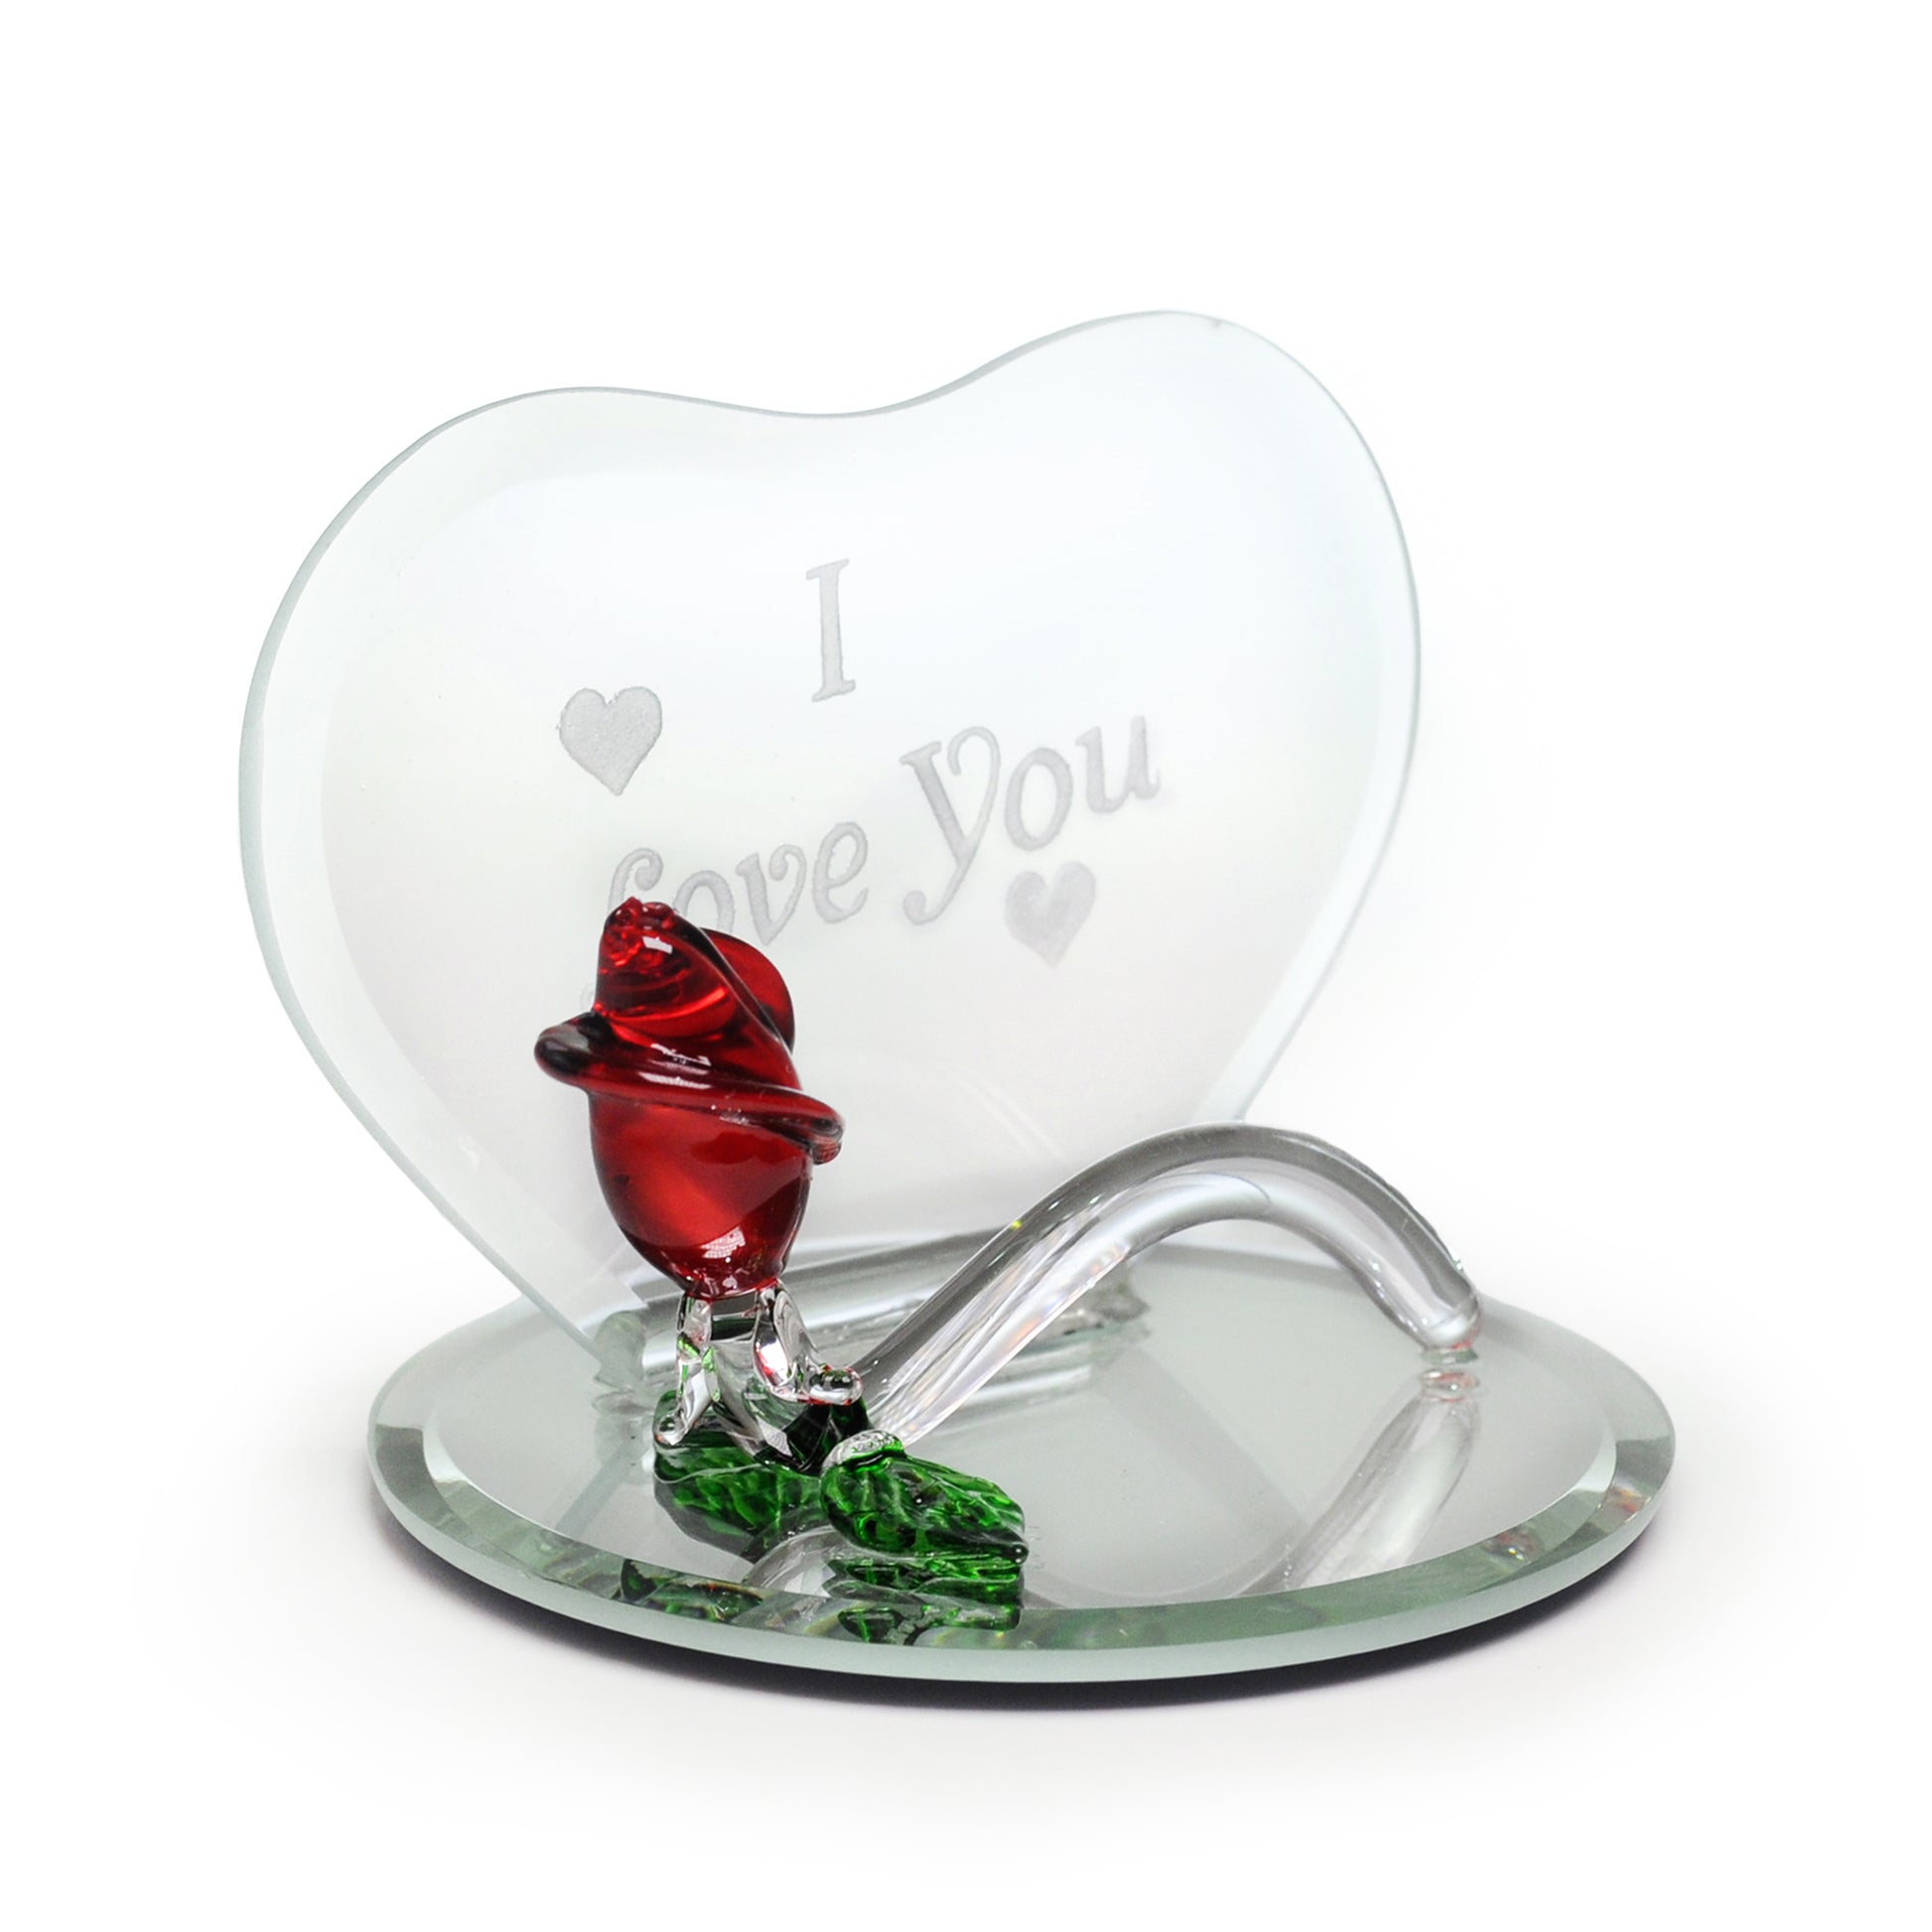 Crystal Castle Heart Shaped Glass plaque with glass rose and mirror base. The words " I love you" are engraved on the glass heart. Side view.